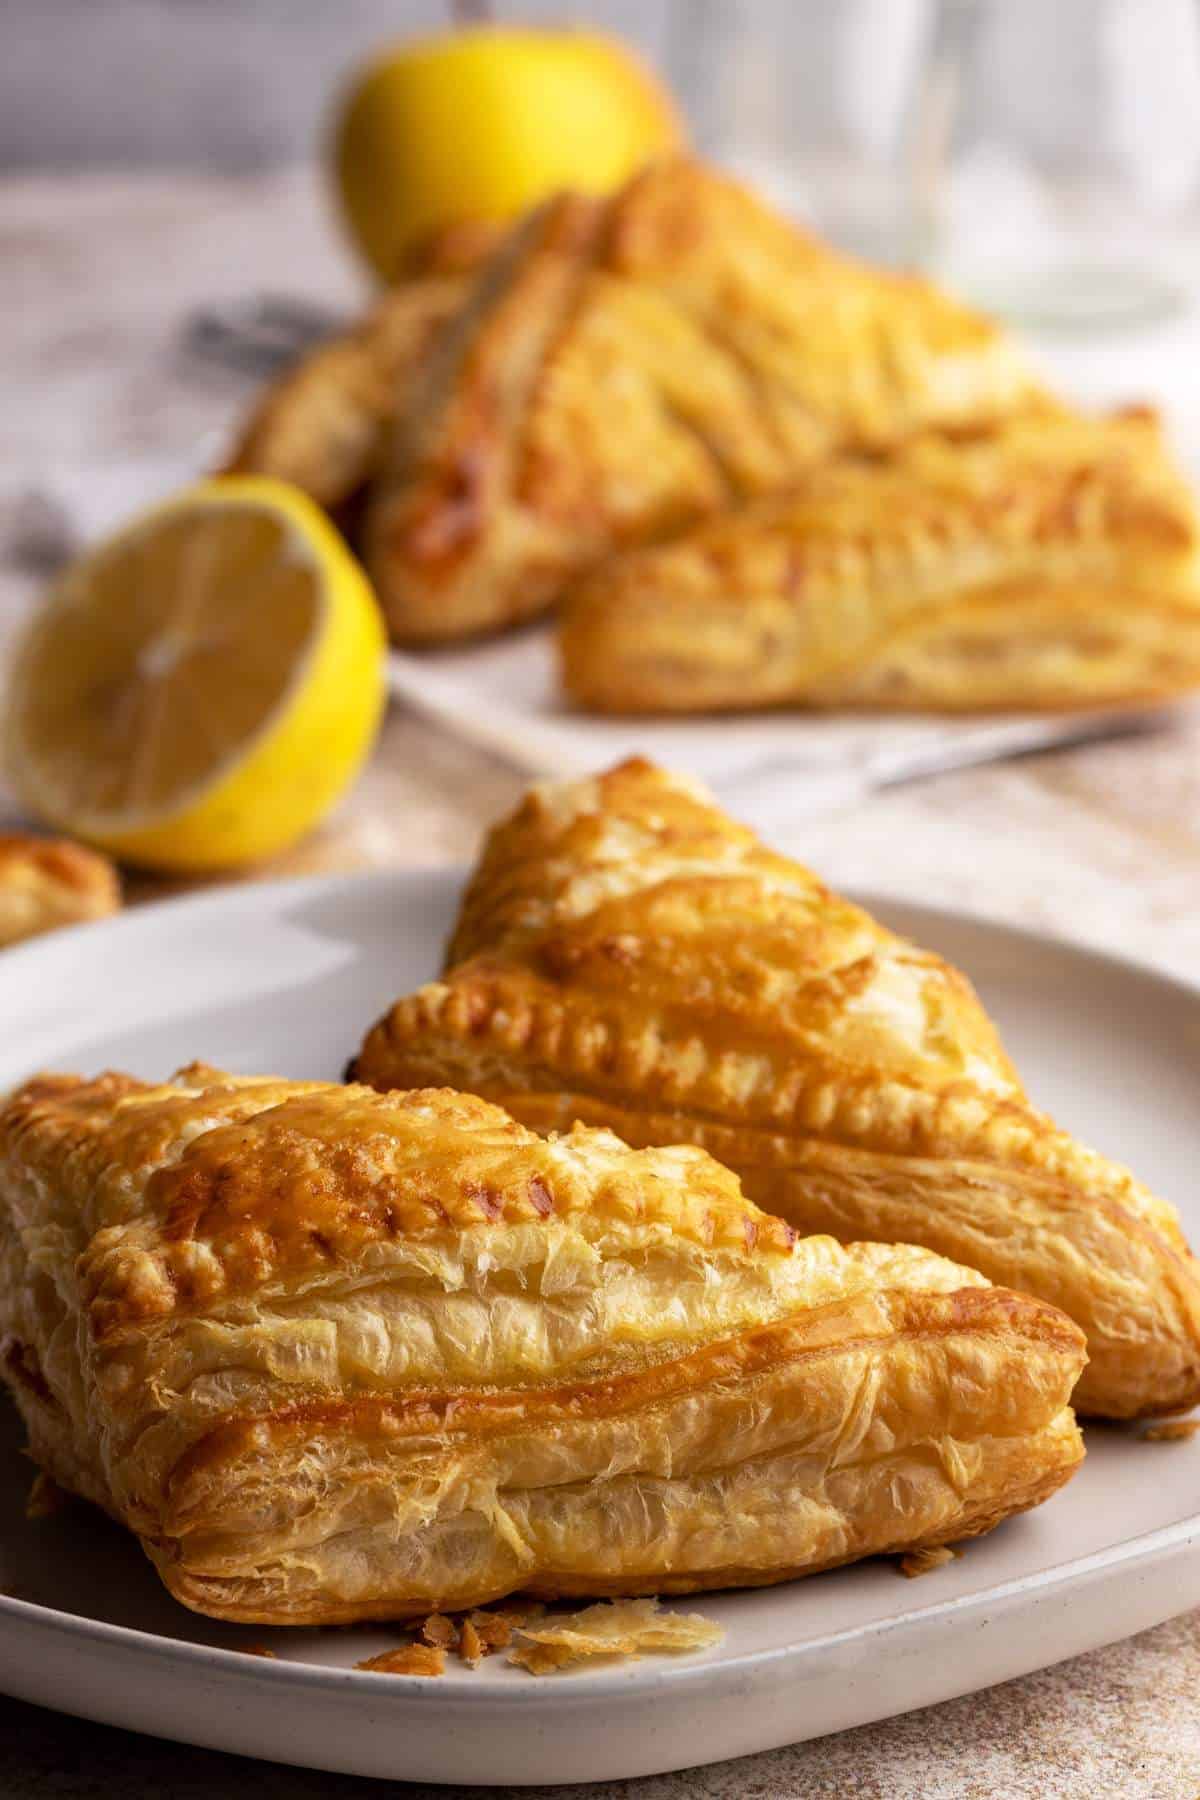 Apple turnovers with flaky puff pastry on a plate.